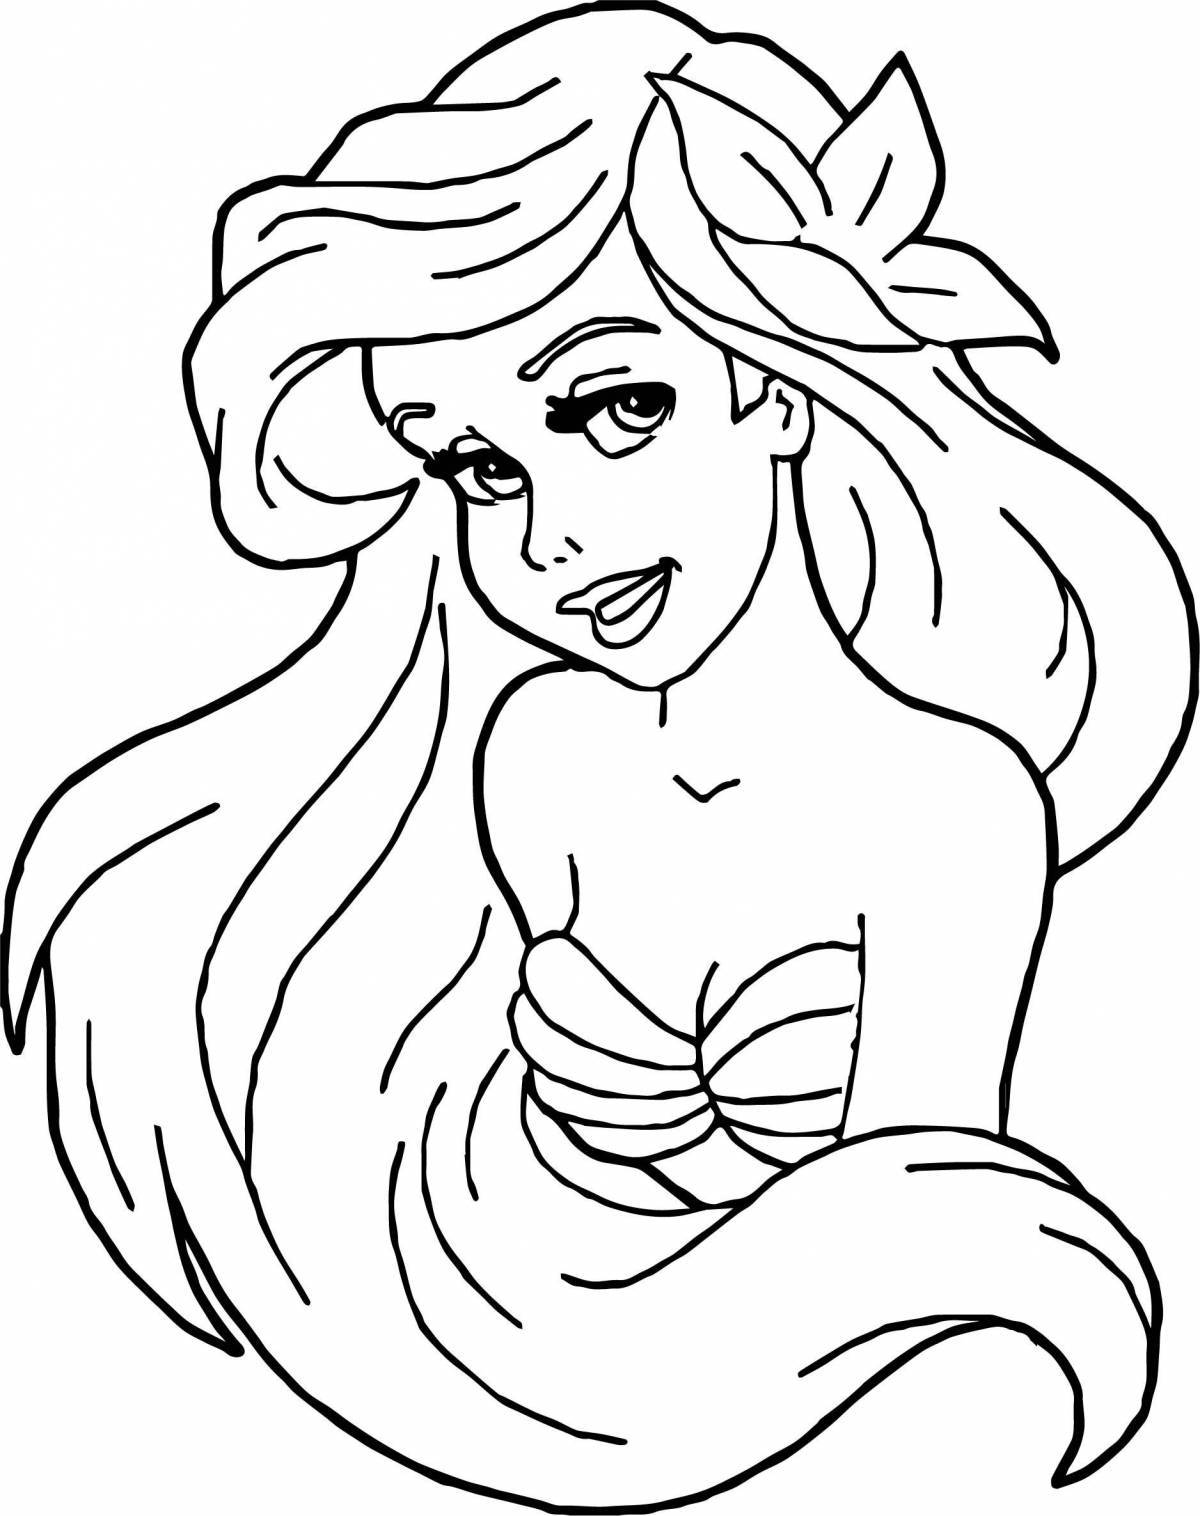 The little mermaid coloring page for kids